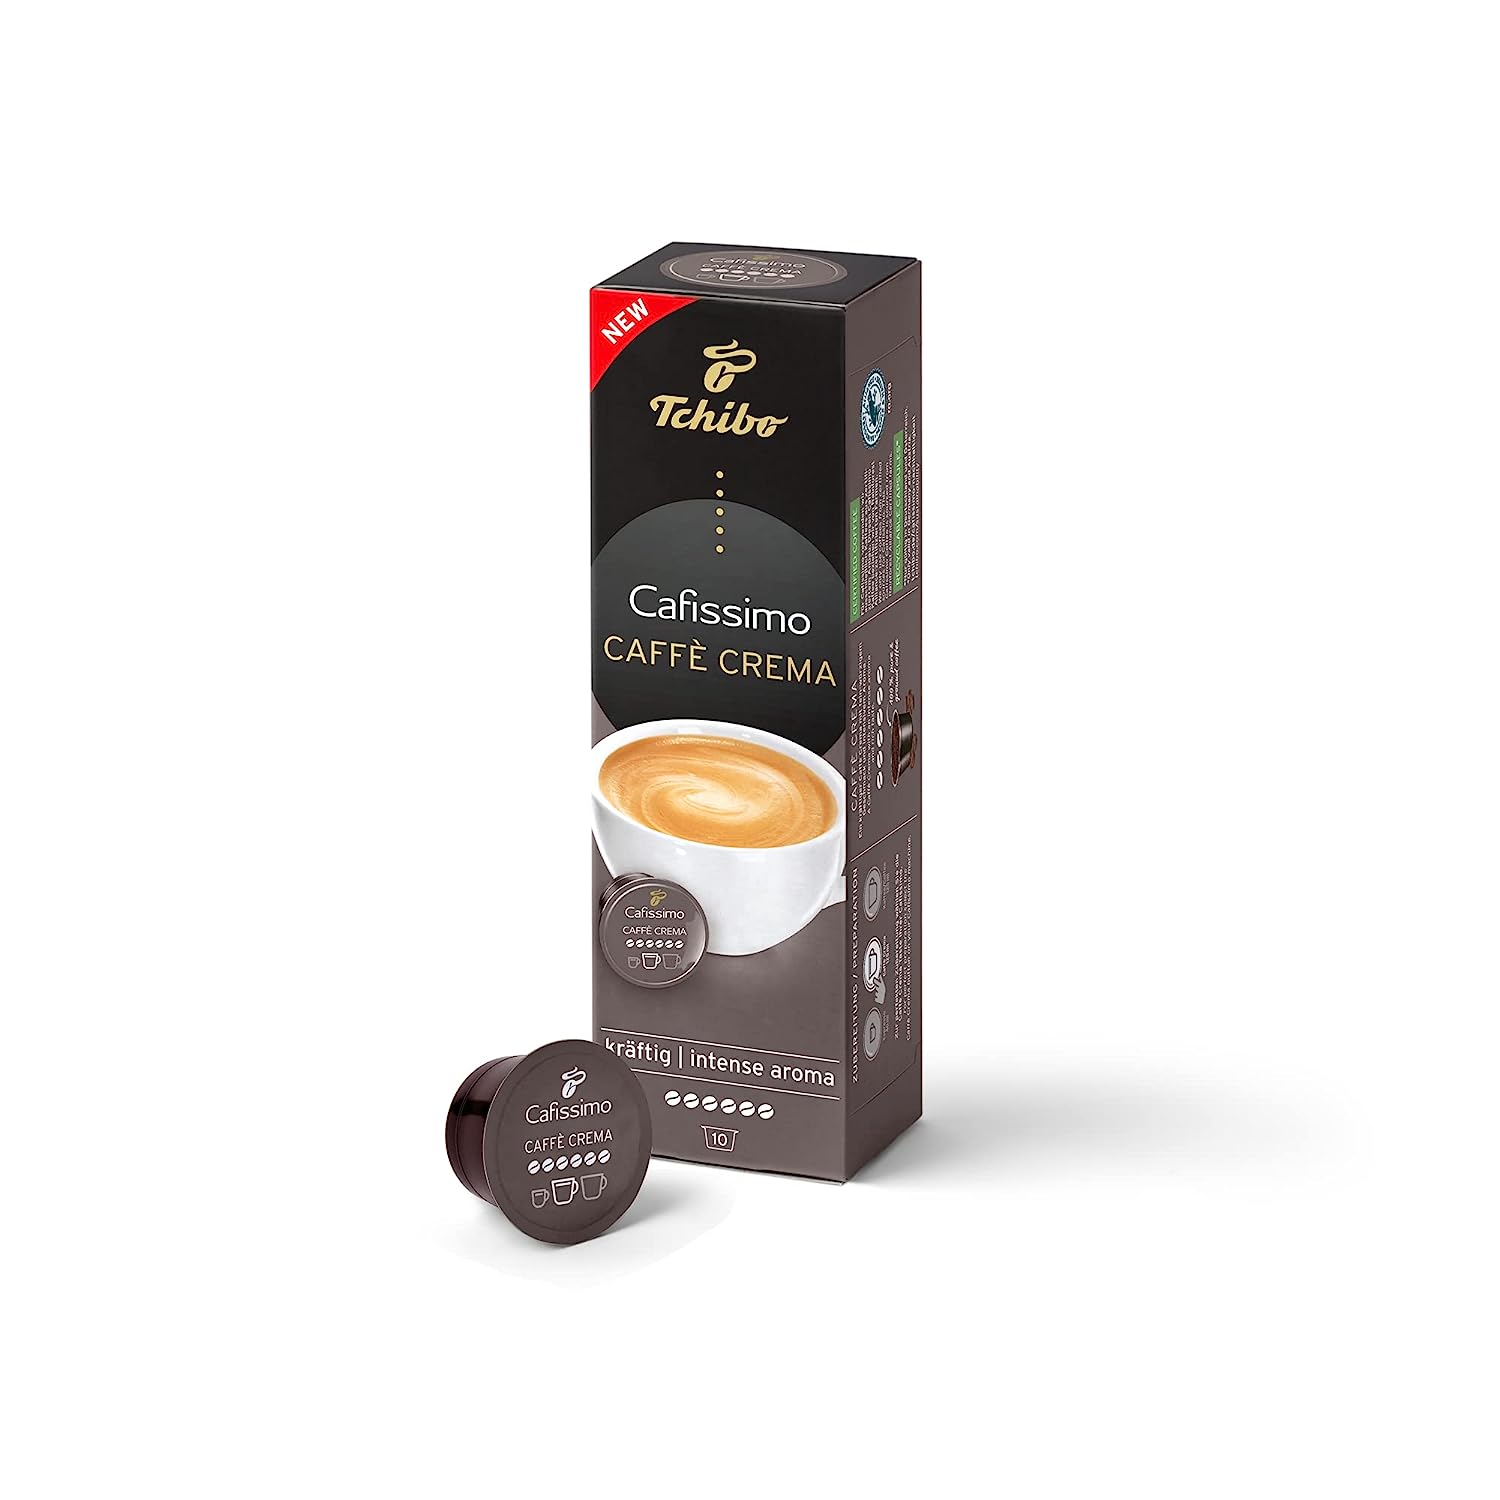 Tchibo Cafissimo Caffè Crema strong coffee capsules, 10 pieces (coffee, intensive with strong roasted aromas), sustainable & fair trade